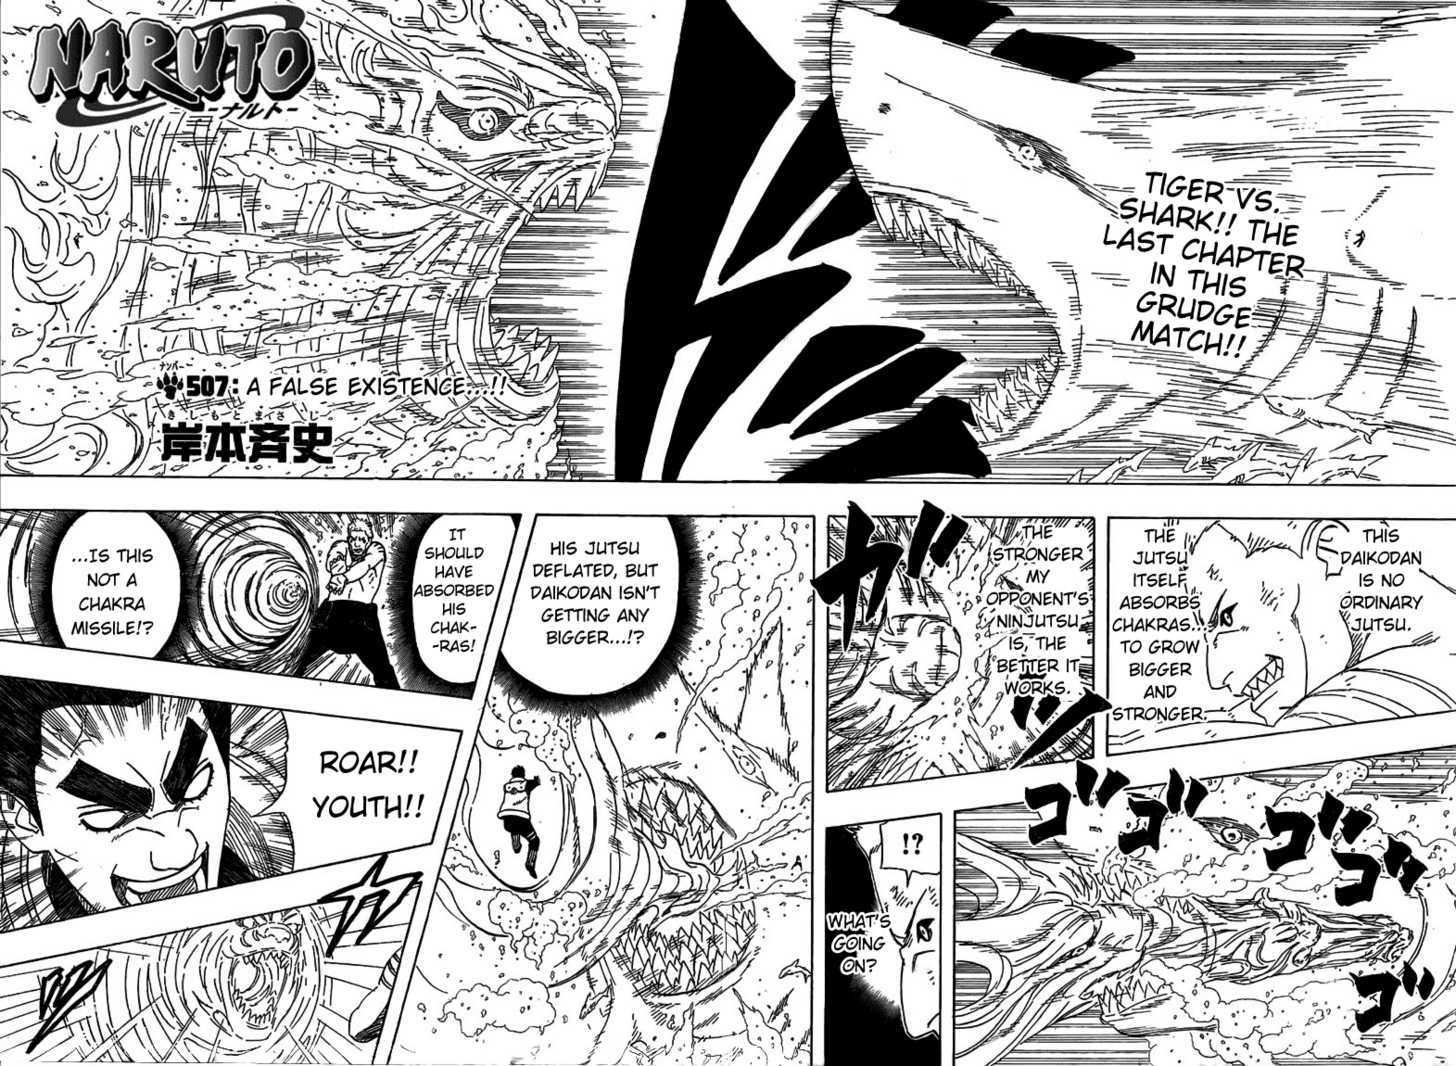 Vol.54 Chapter 507 – An Existence of Falsehoods…!! | 2 page